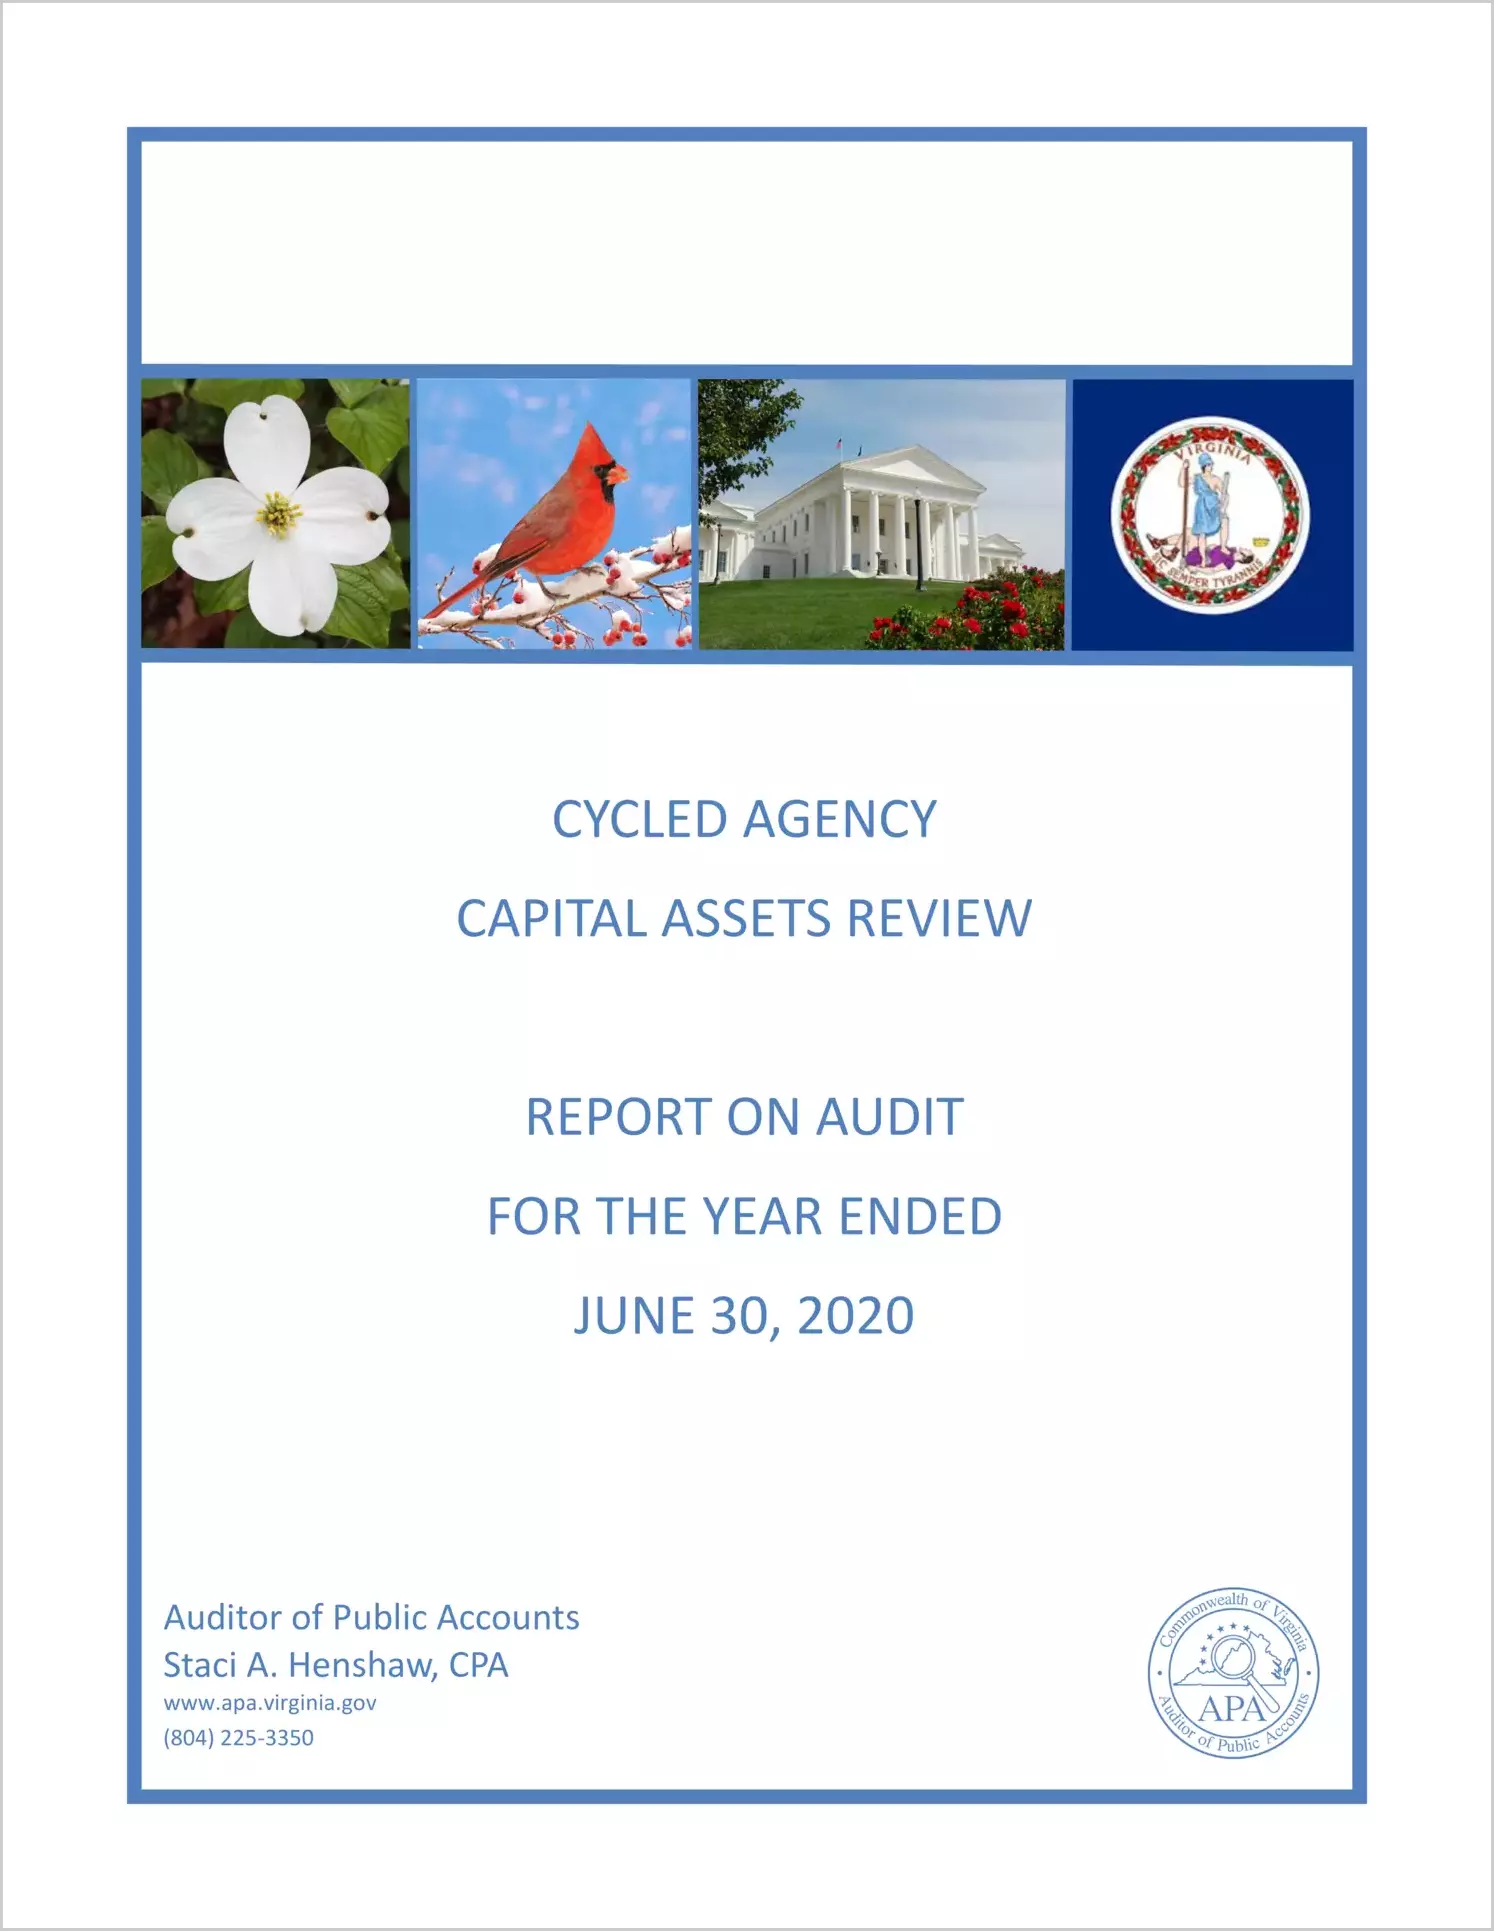 Cycled Agency Capital Assets Review for the year ended June 30, 2020